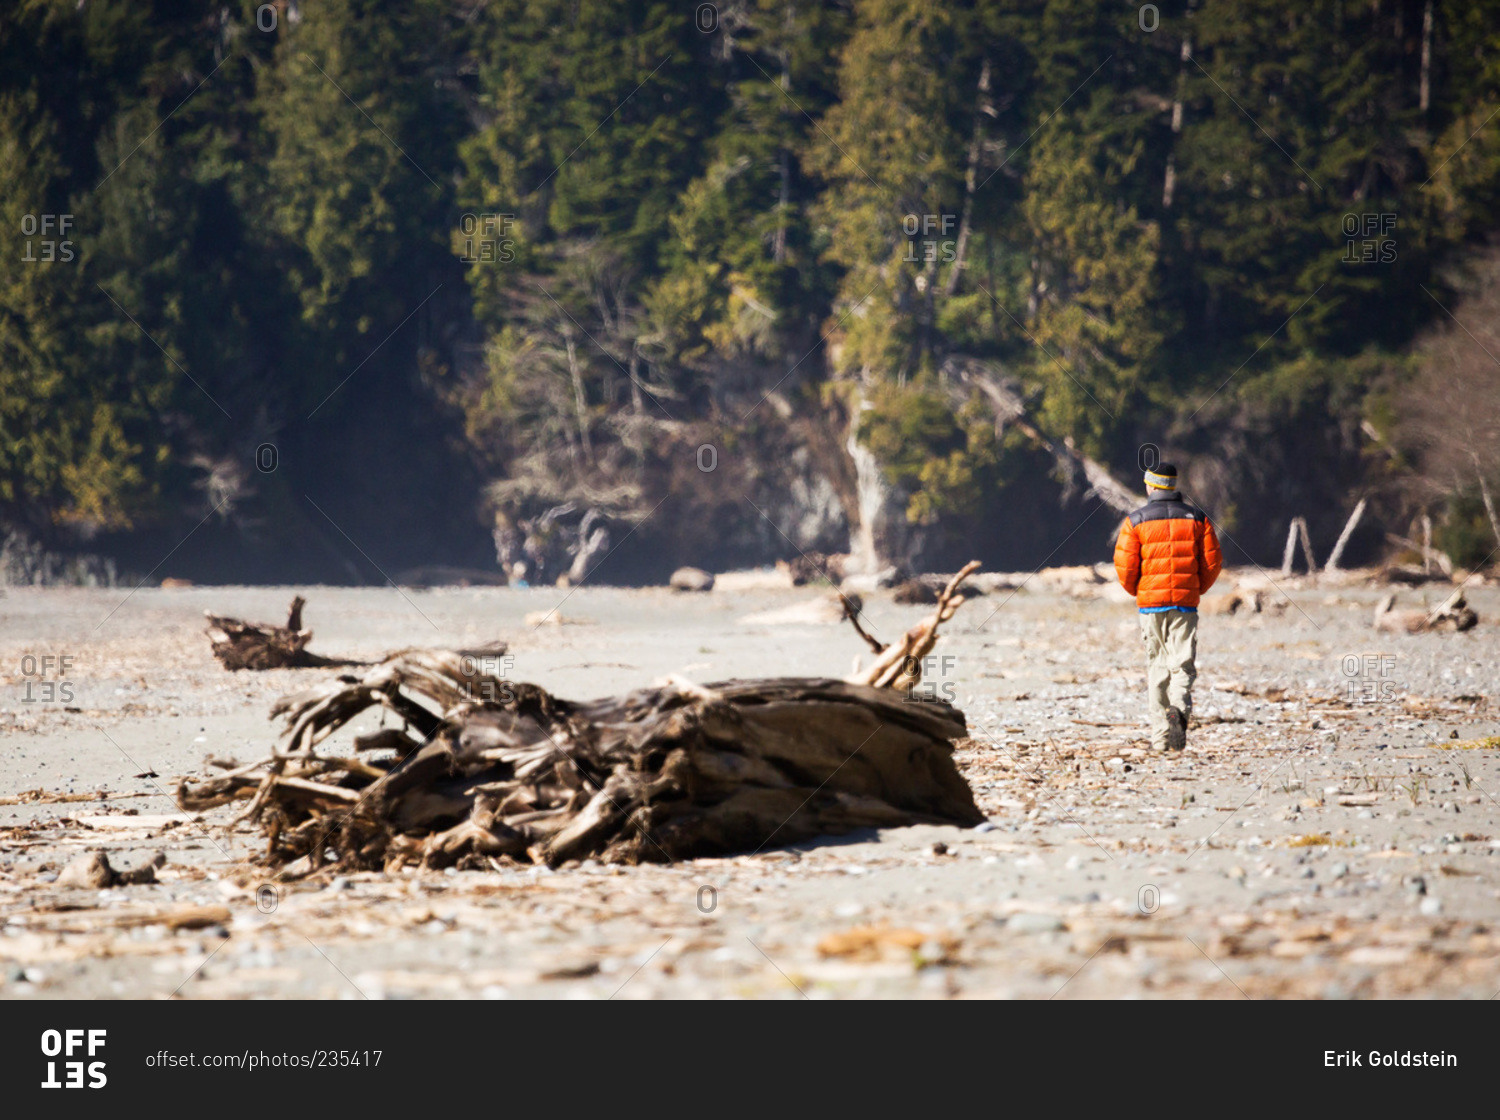 Hiker walking past large pieces of driftwood on Vancouver Island beach